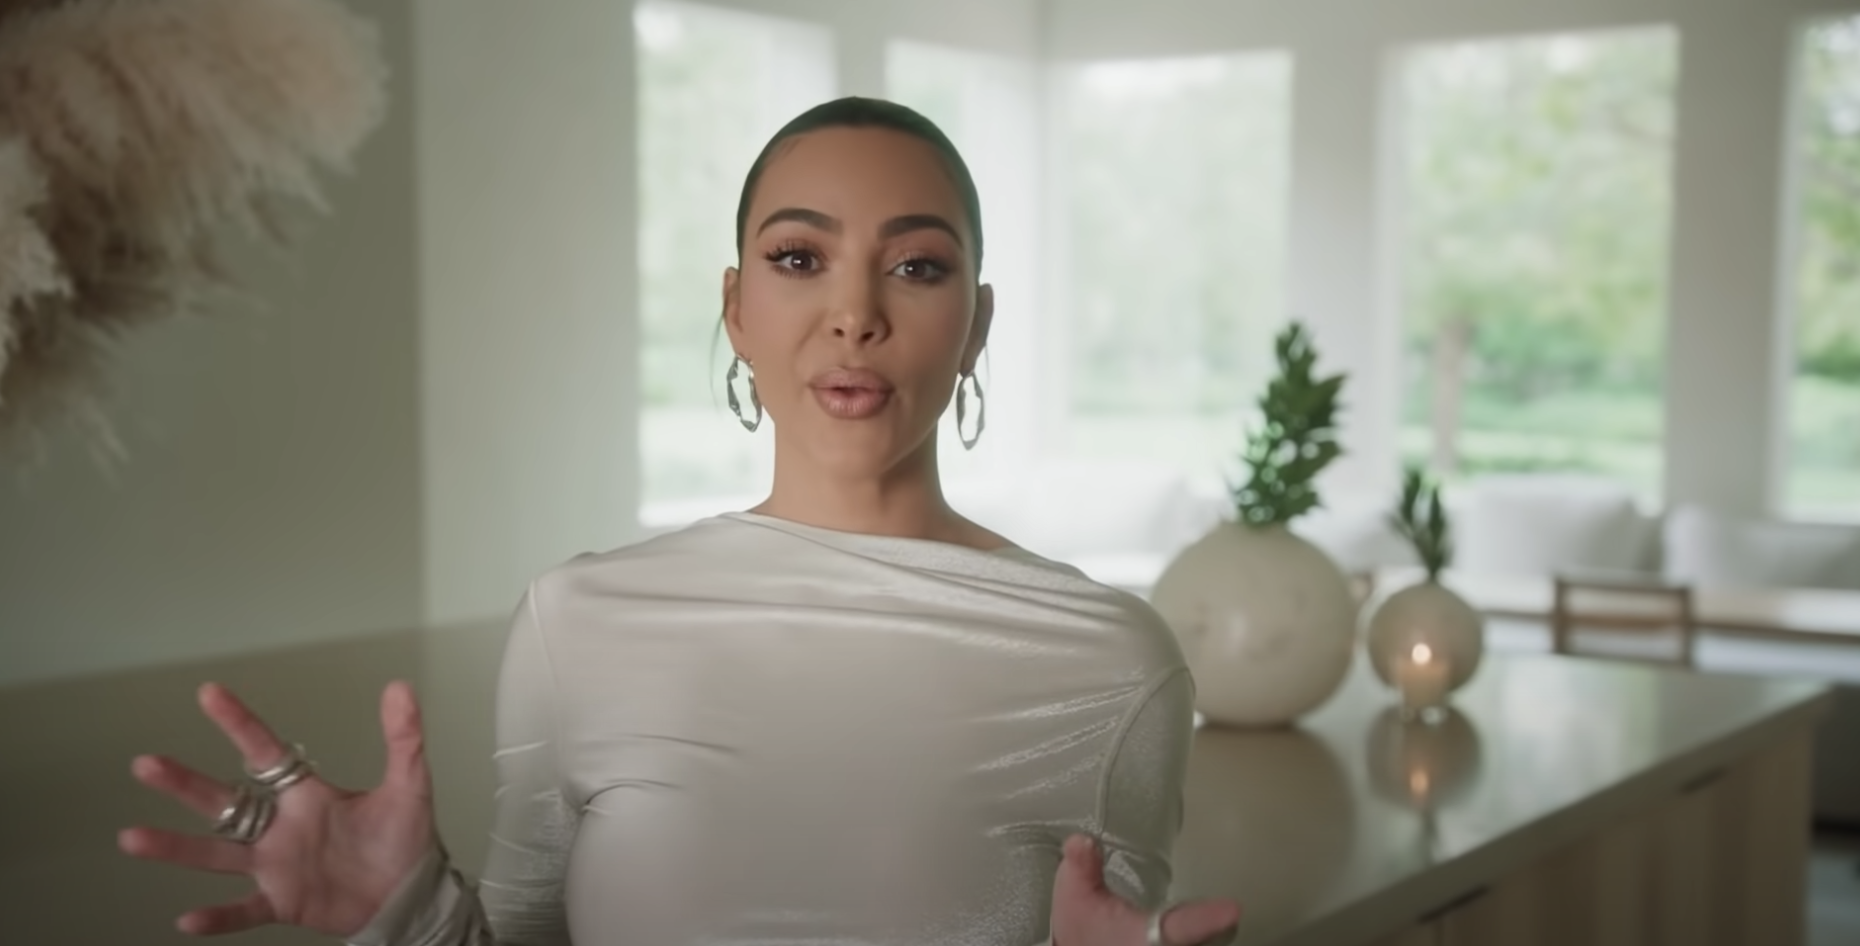 Kim K giving her video tour of her home